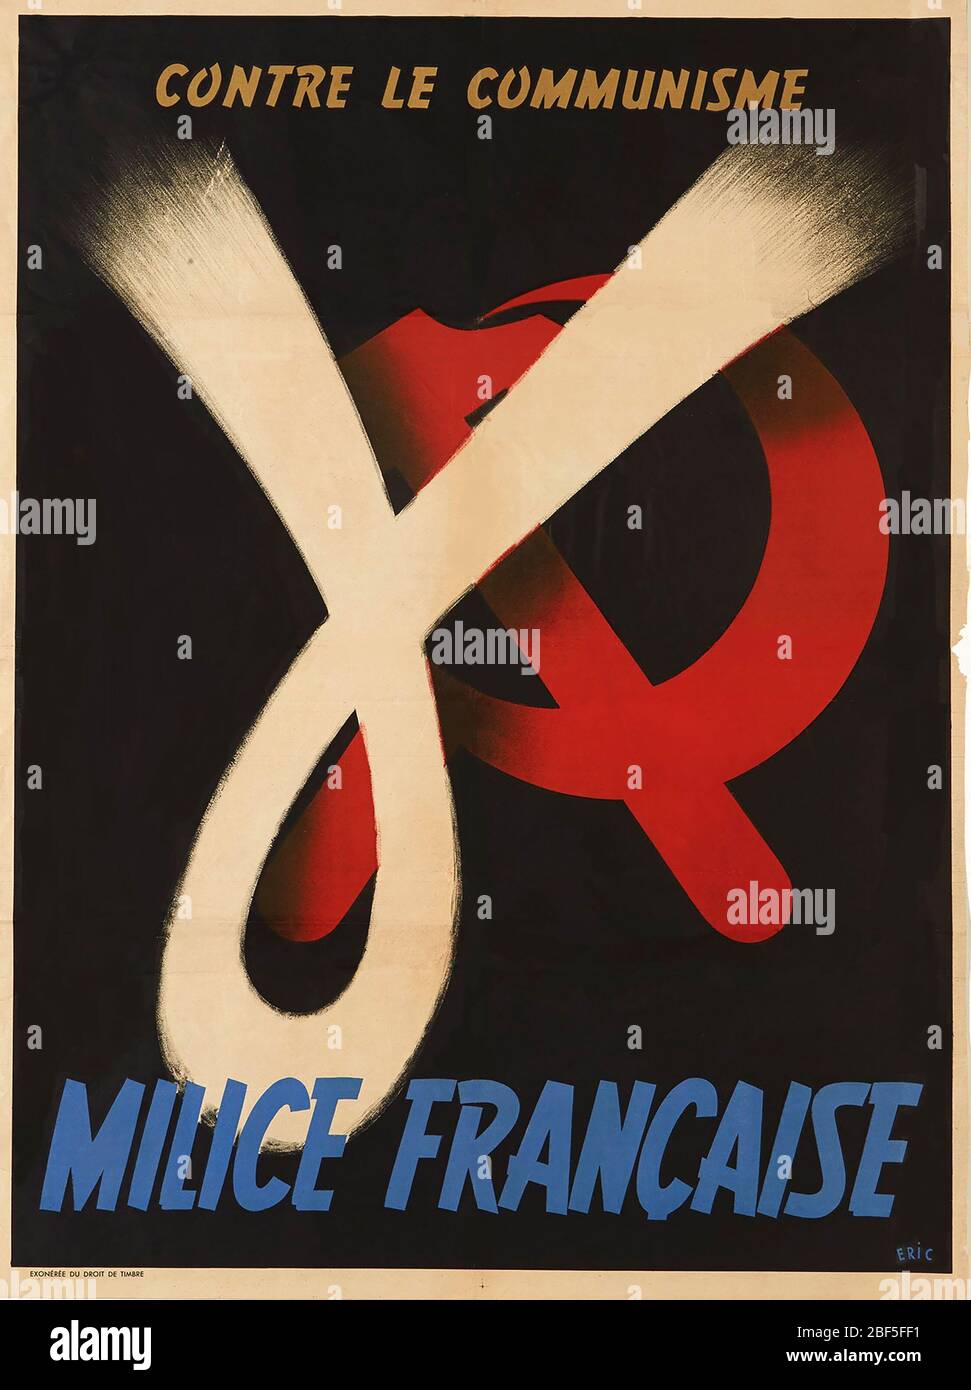 MILICE Poster for the Vichy France political paramilitary organisation showing their loop symbol combating Communism. Stock Photo